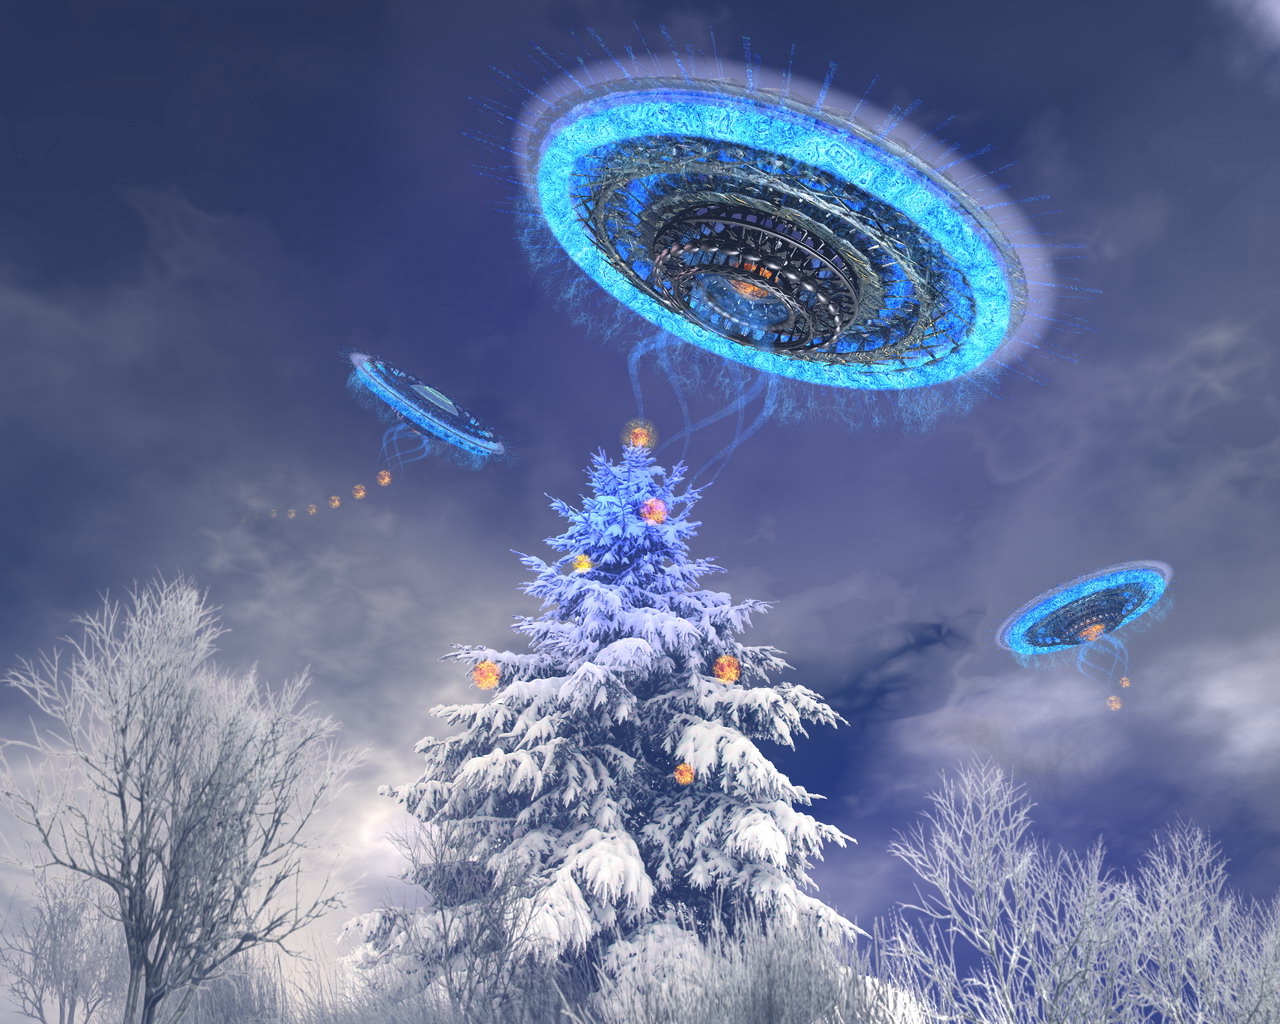 Previous, Archive - Winter wallpapers - New UFO wallpaper